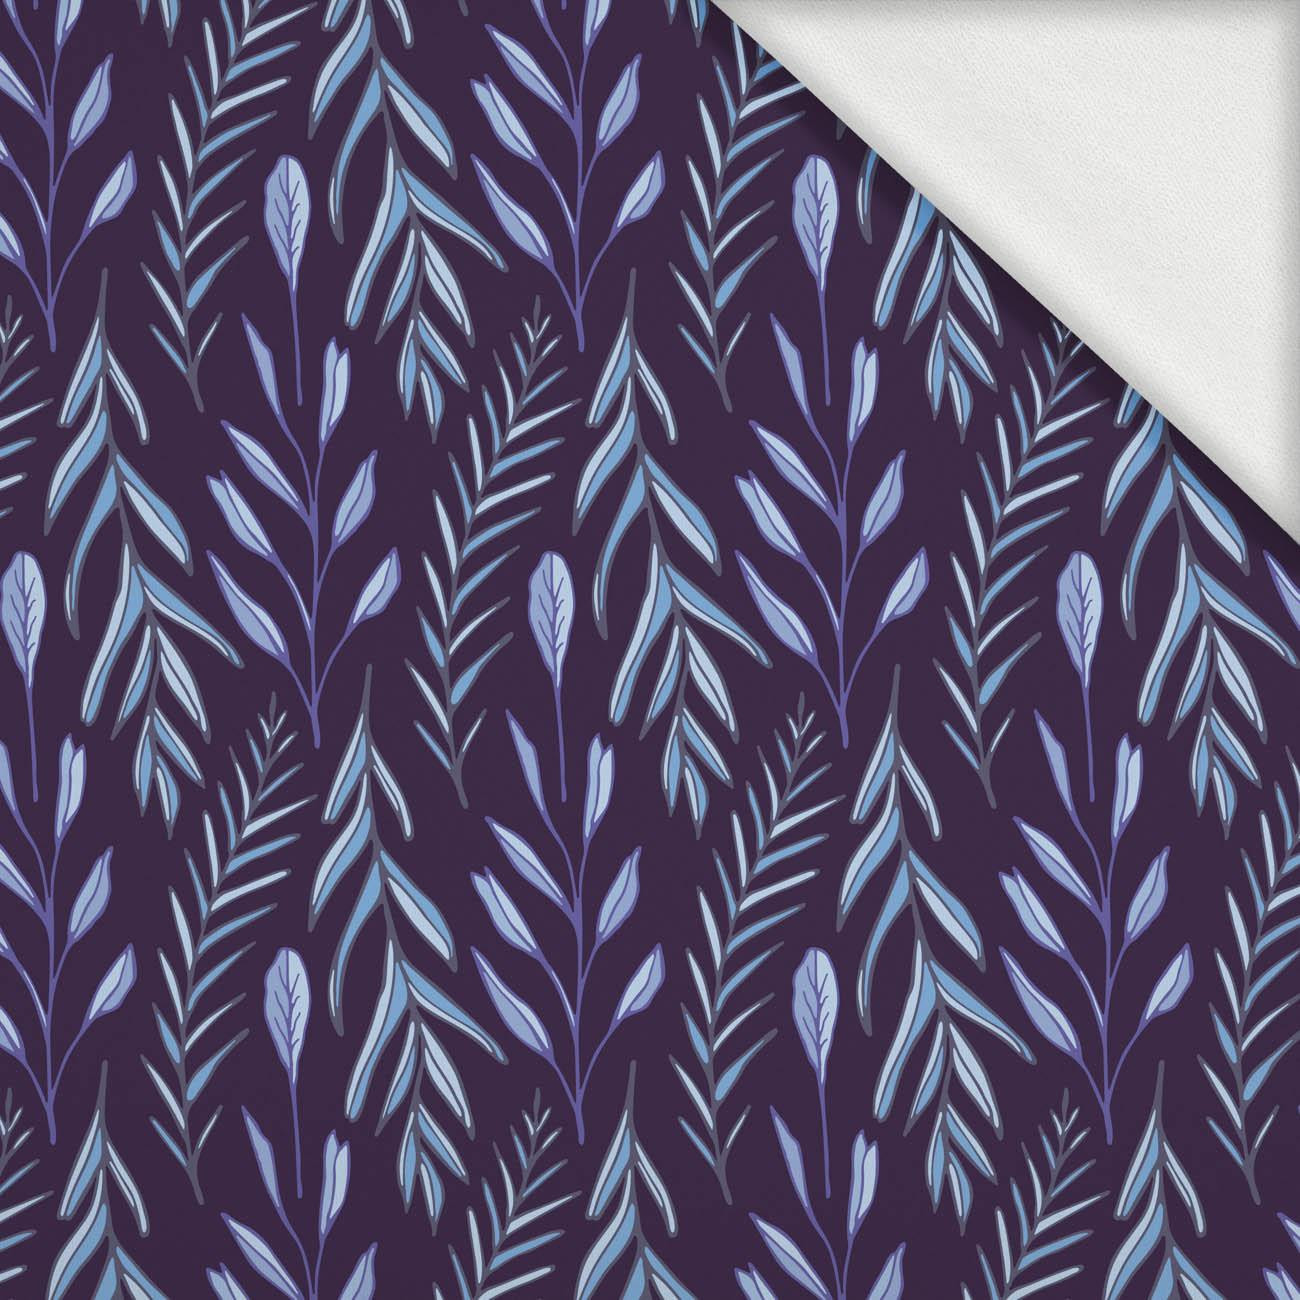 BLUE LEAVES pat. 4 - looped knit fabric with elastane ITY